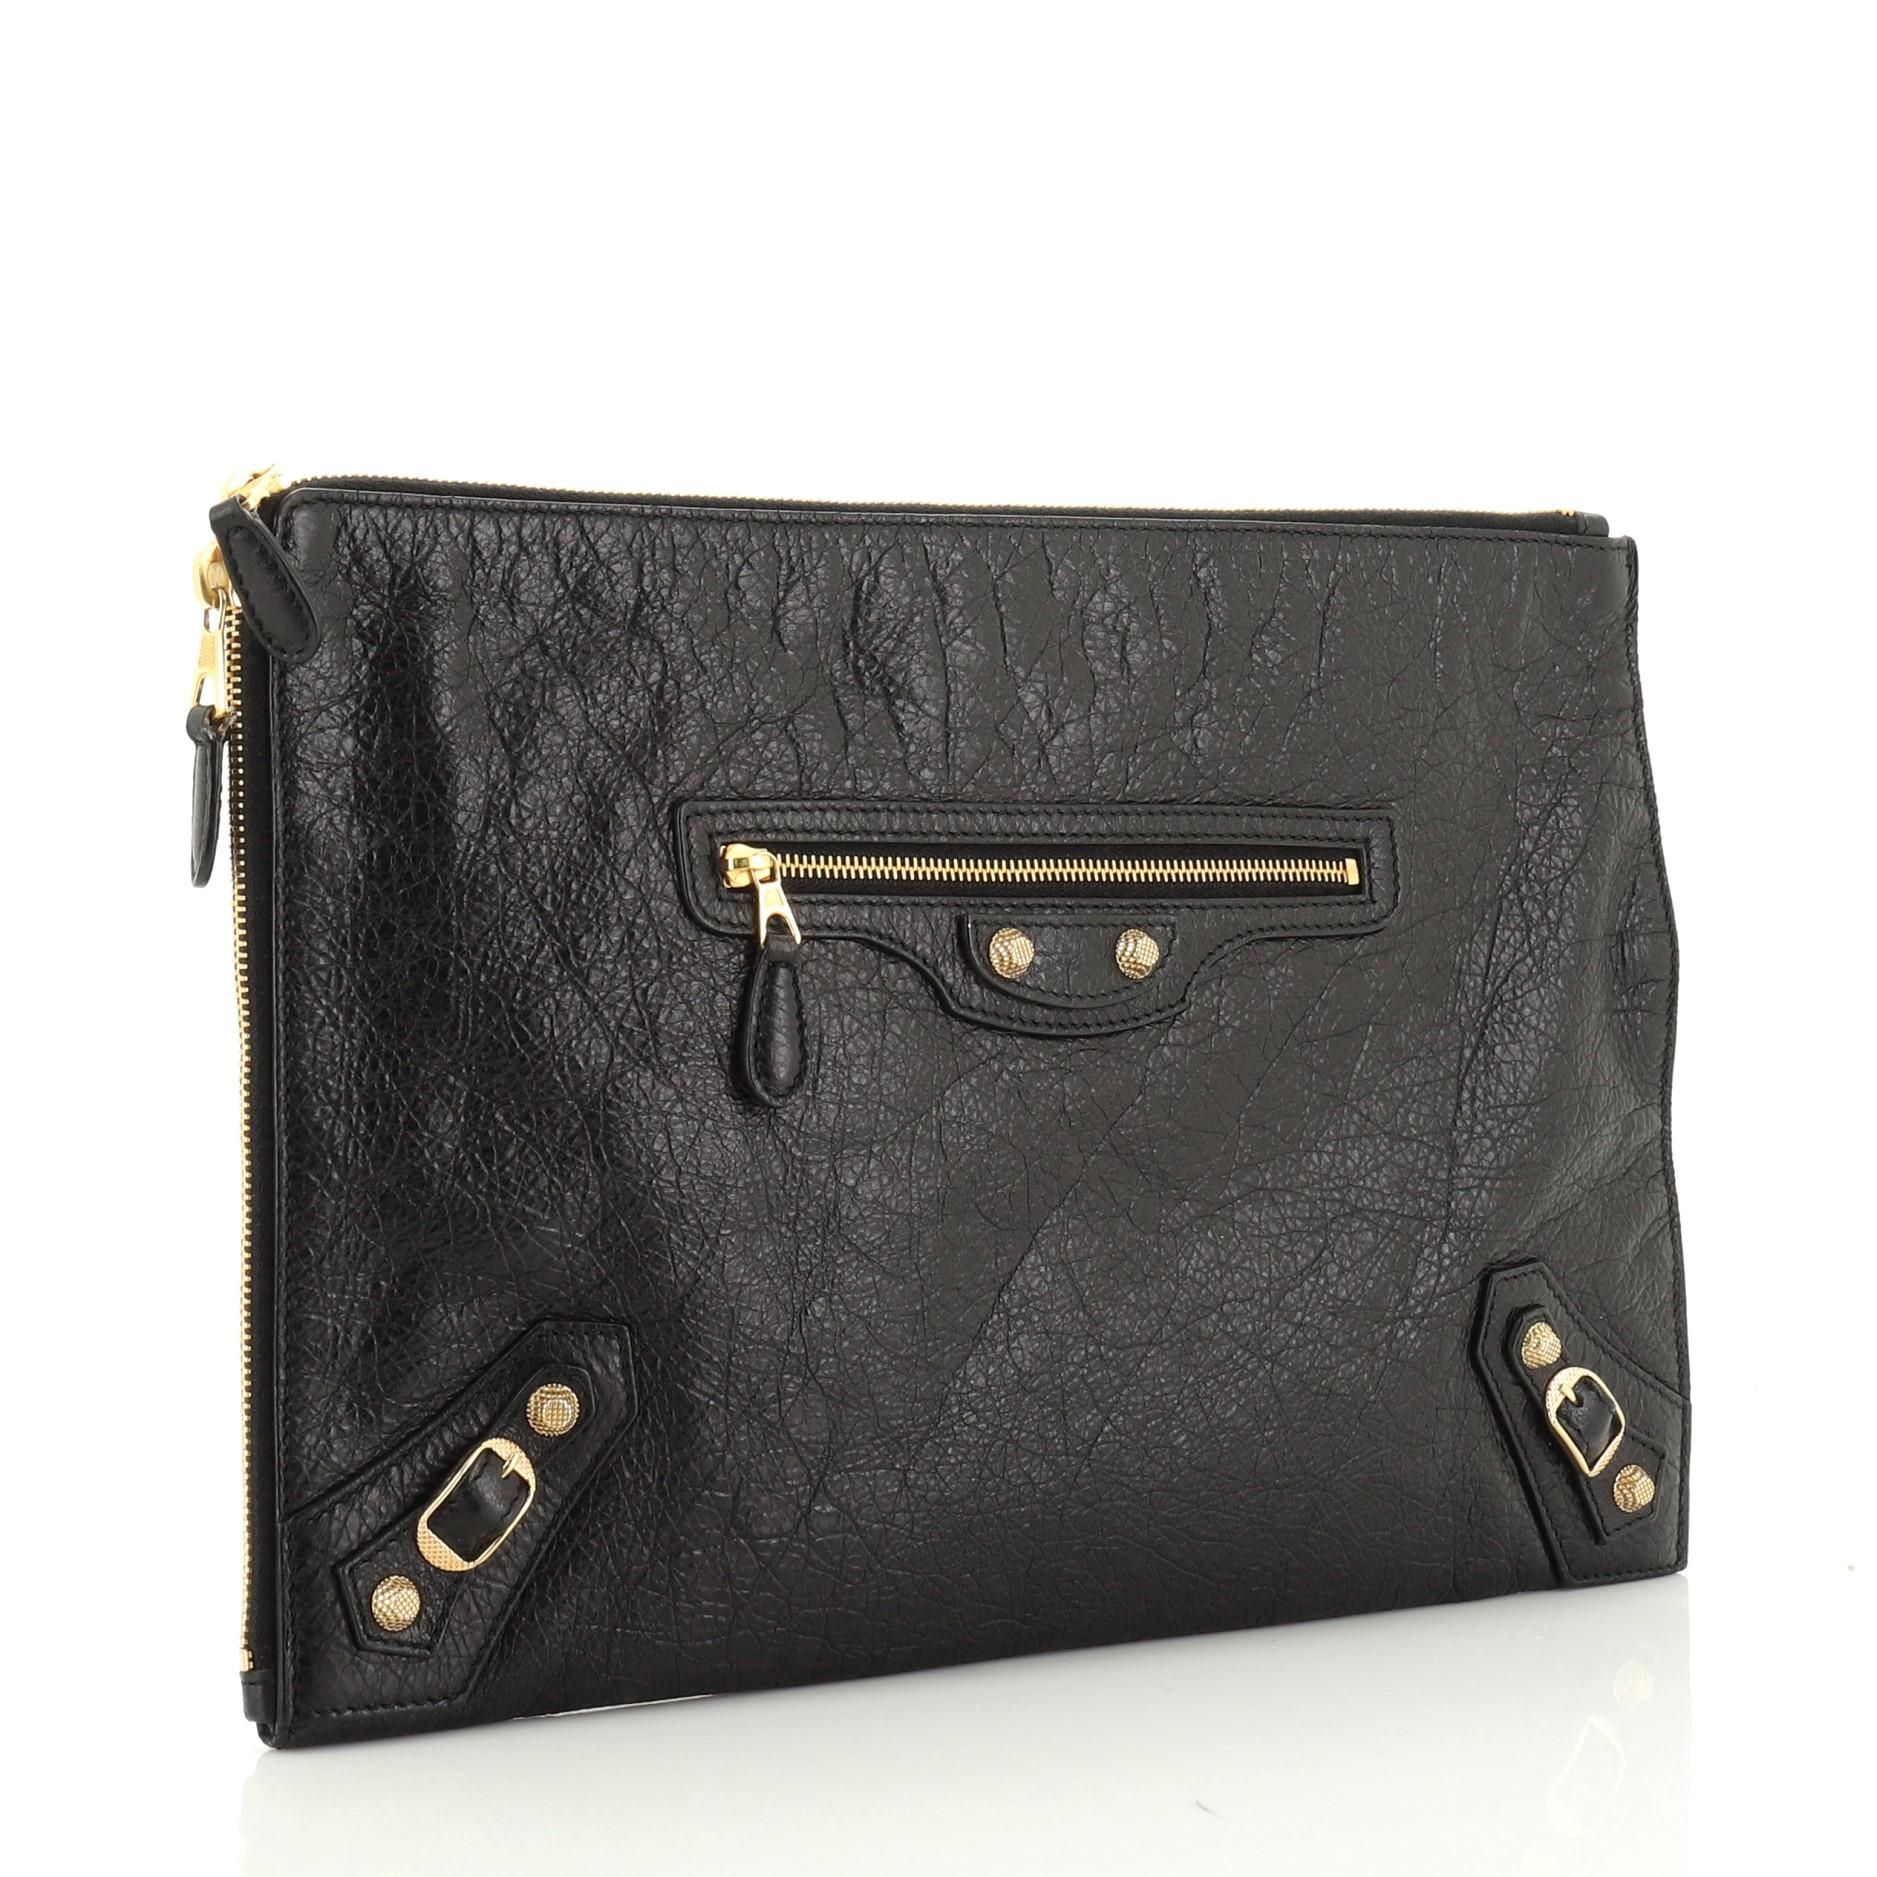 This Balenciaga Zip Around Giant Studs Clutch Leather Medium, crafted from black leather, features studs and buckle details, exterior zip pocket, and gold-tone hardware. Its all-around zip closure opens to a black fabric interior with slip pocket.